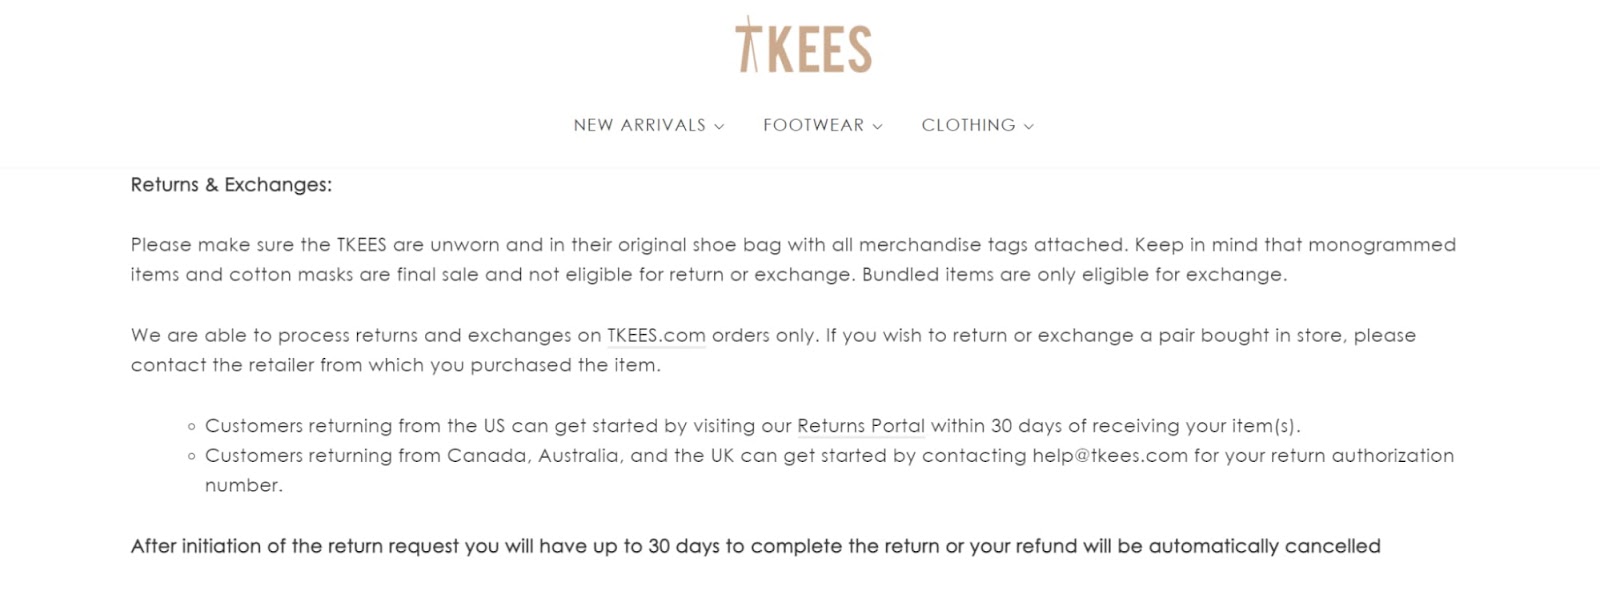 tkees return and exchange policy text